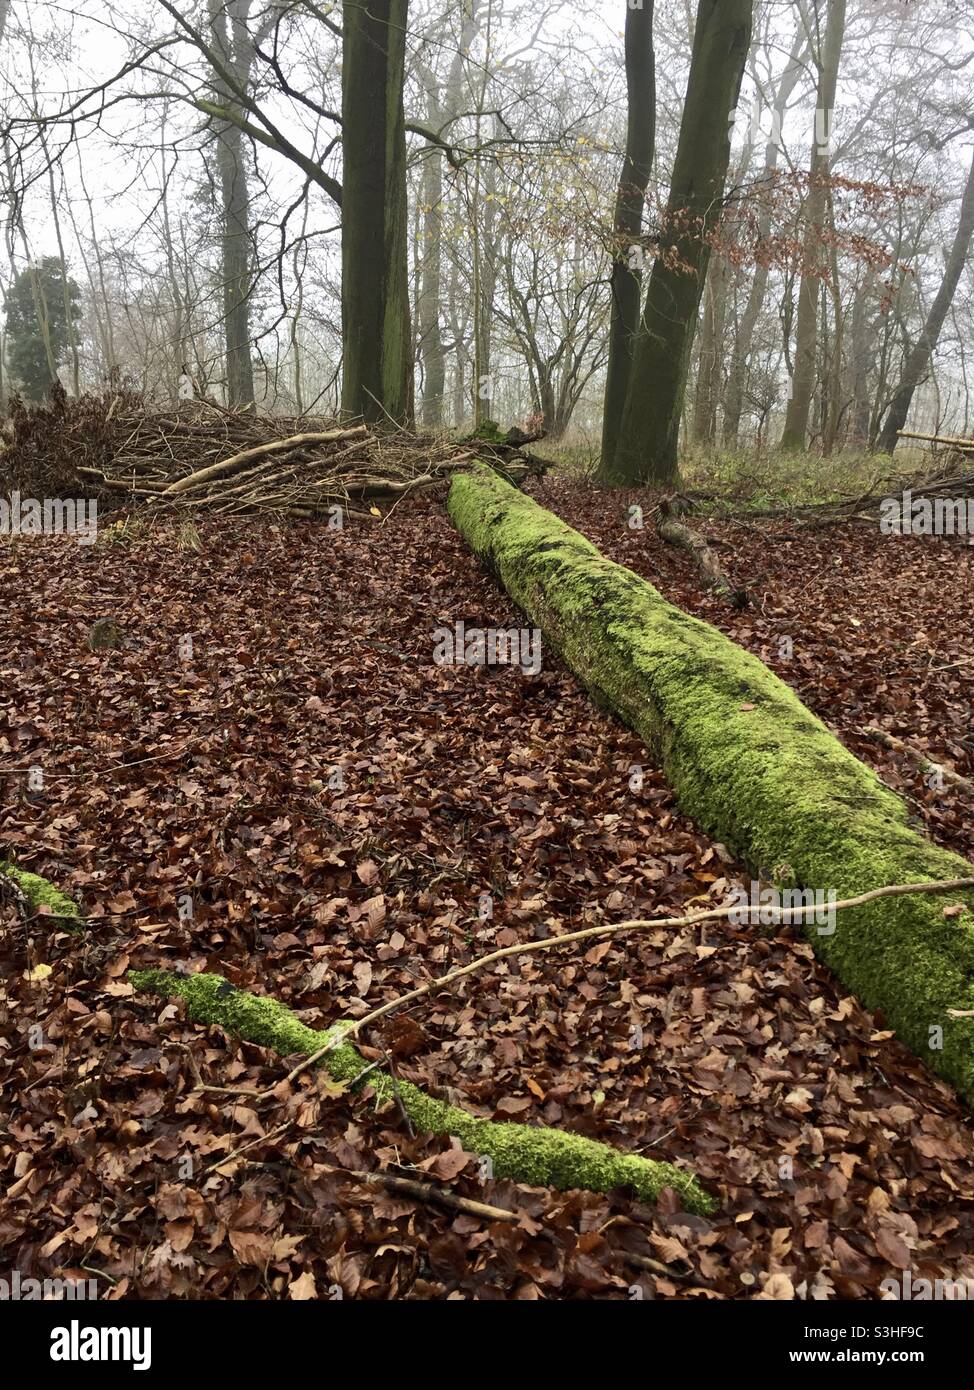 Fallen tree covered in green moss on a bed of rusty brown leaves in Wendover Woods, South England Stock Photo